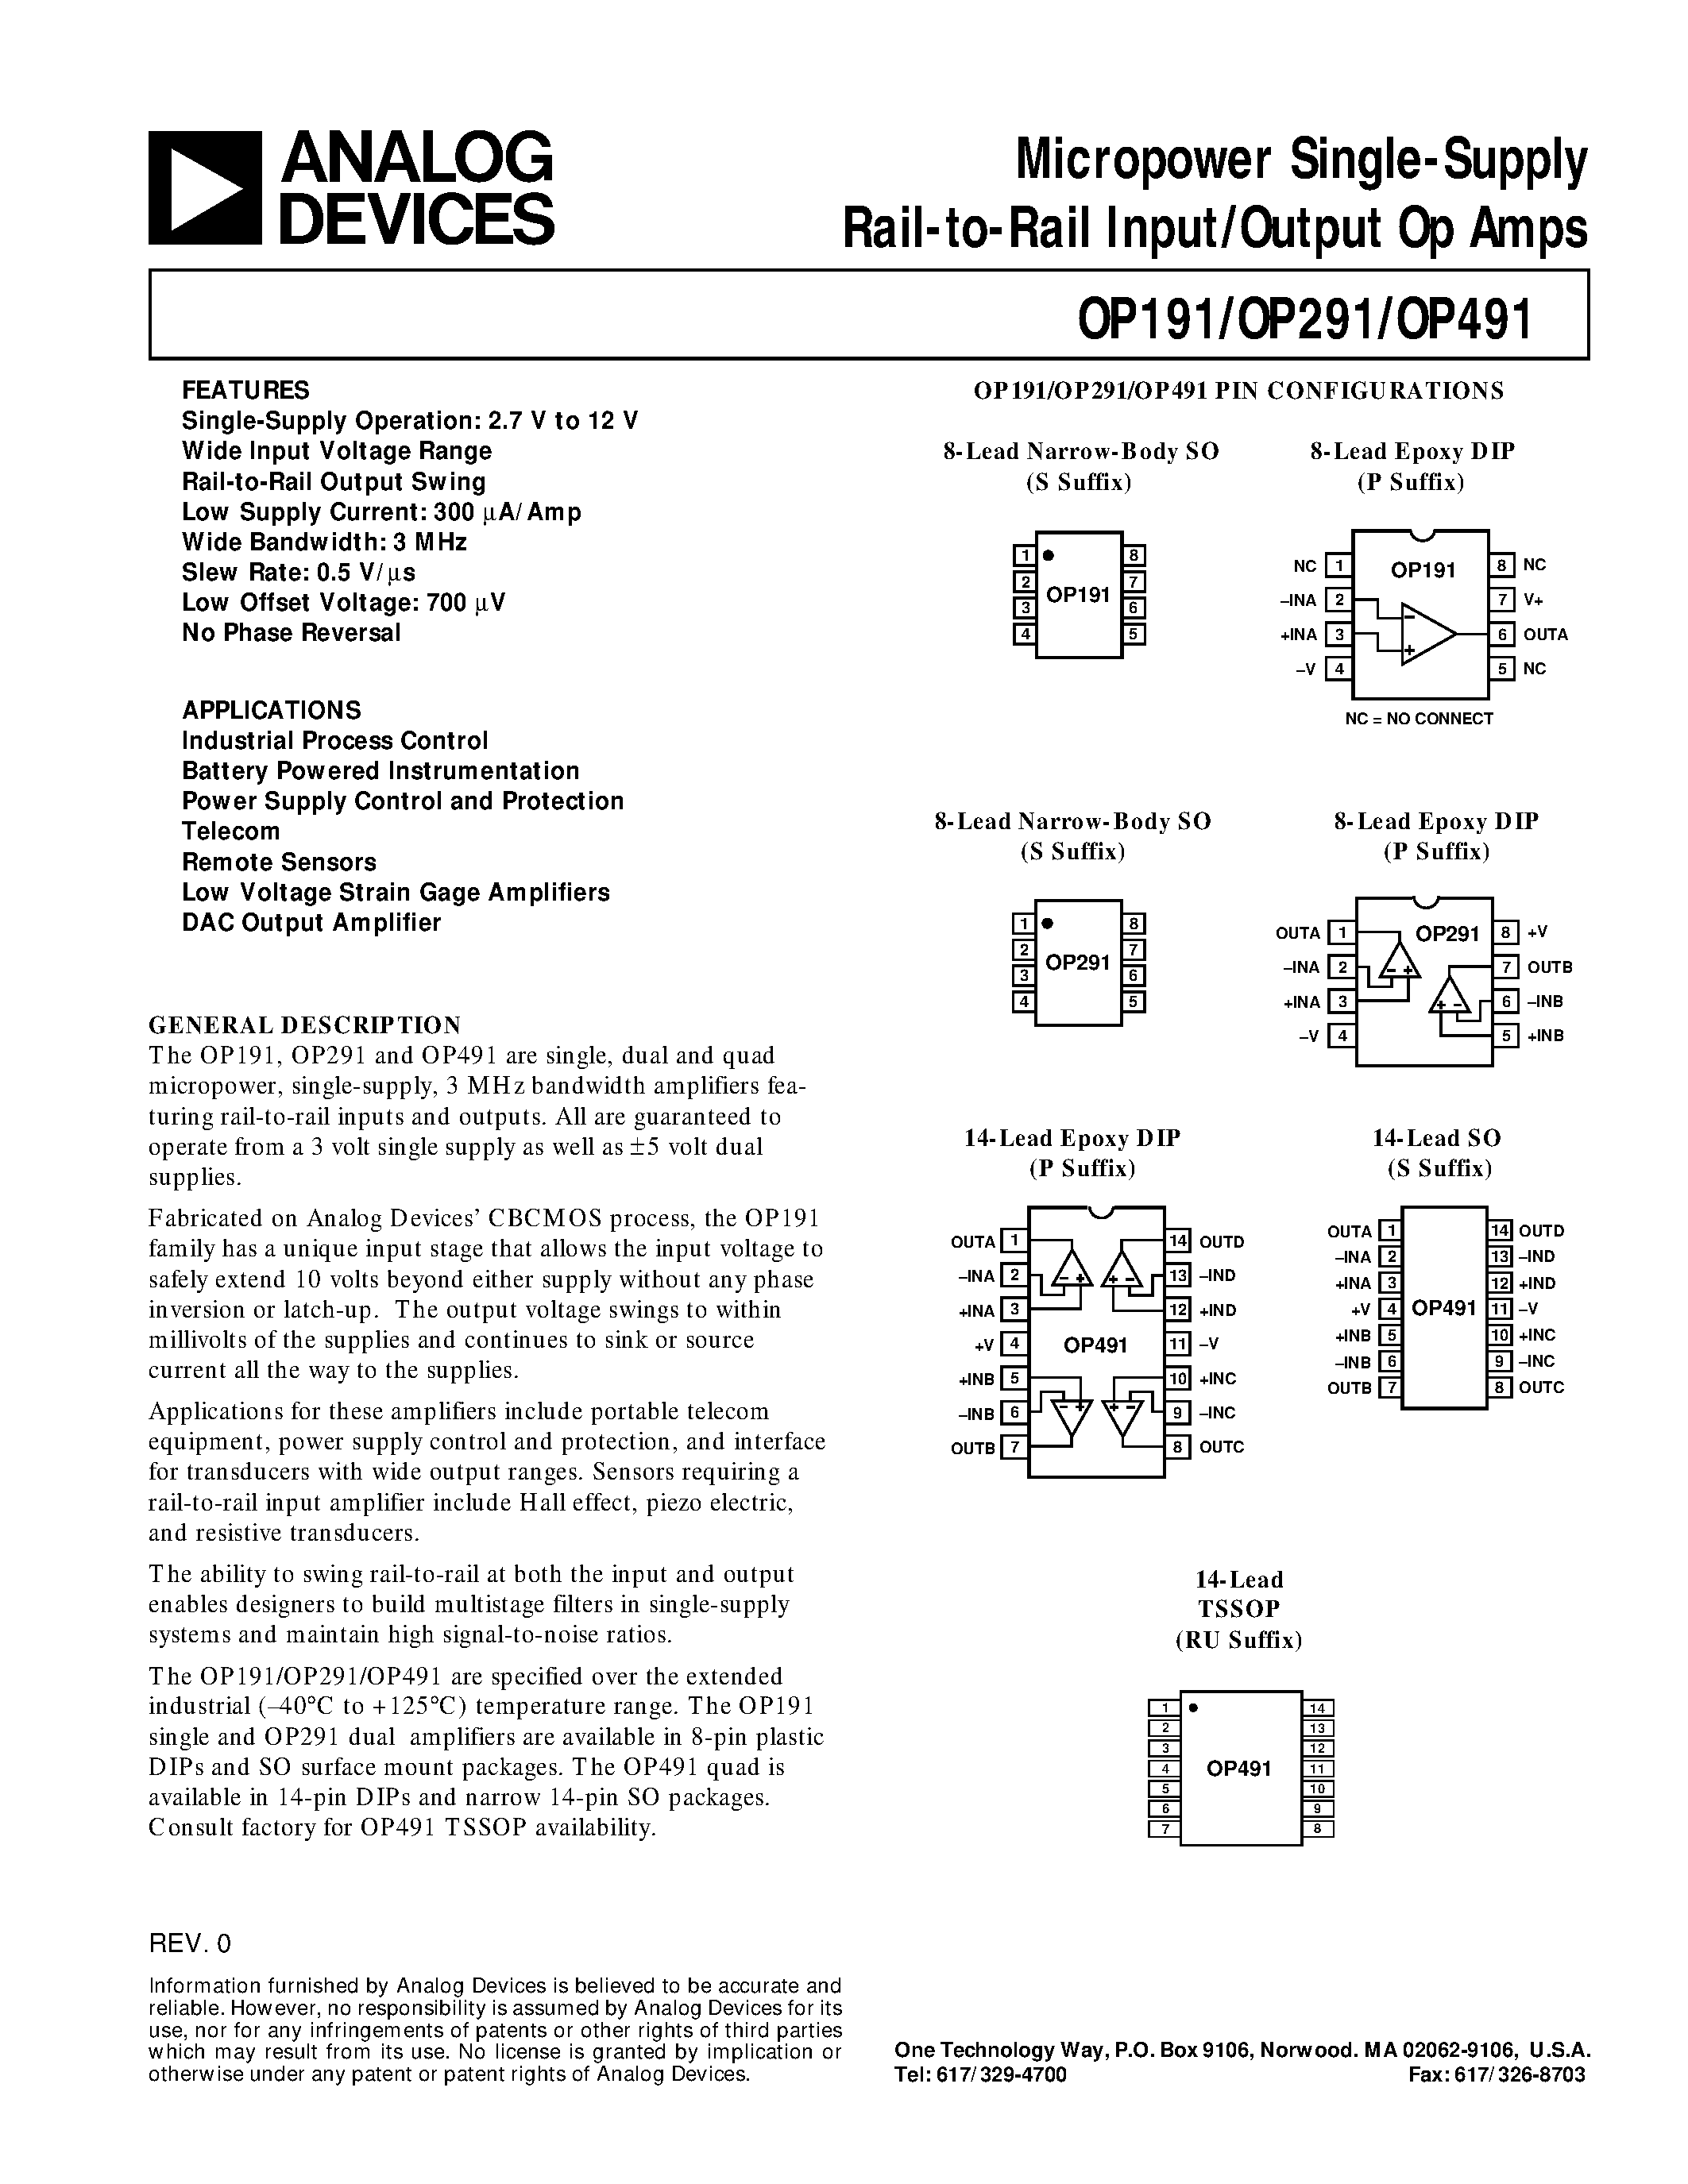 Datasheet OP191 - Micropower Single-Supply Rail-to-Rail Input/Output Op Amps page 1